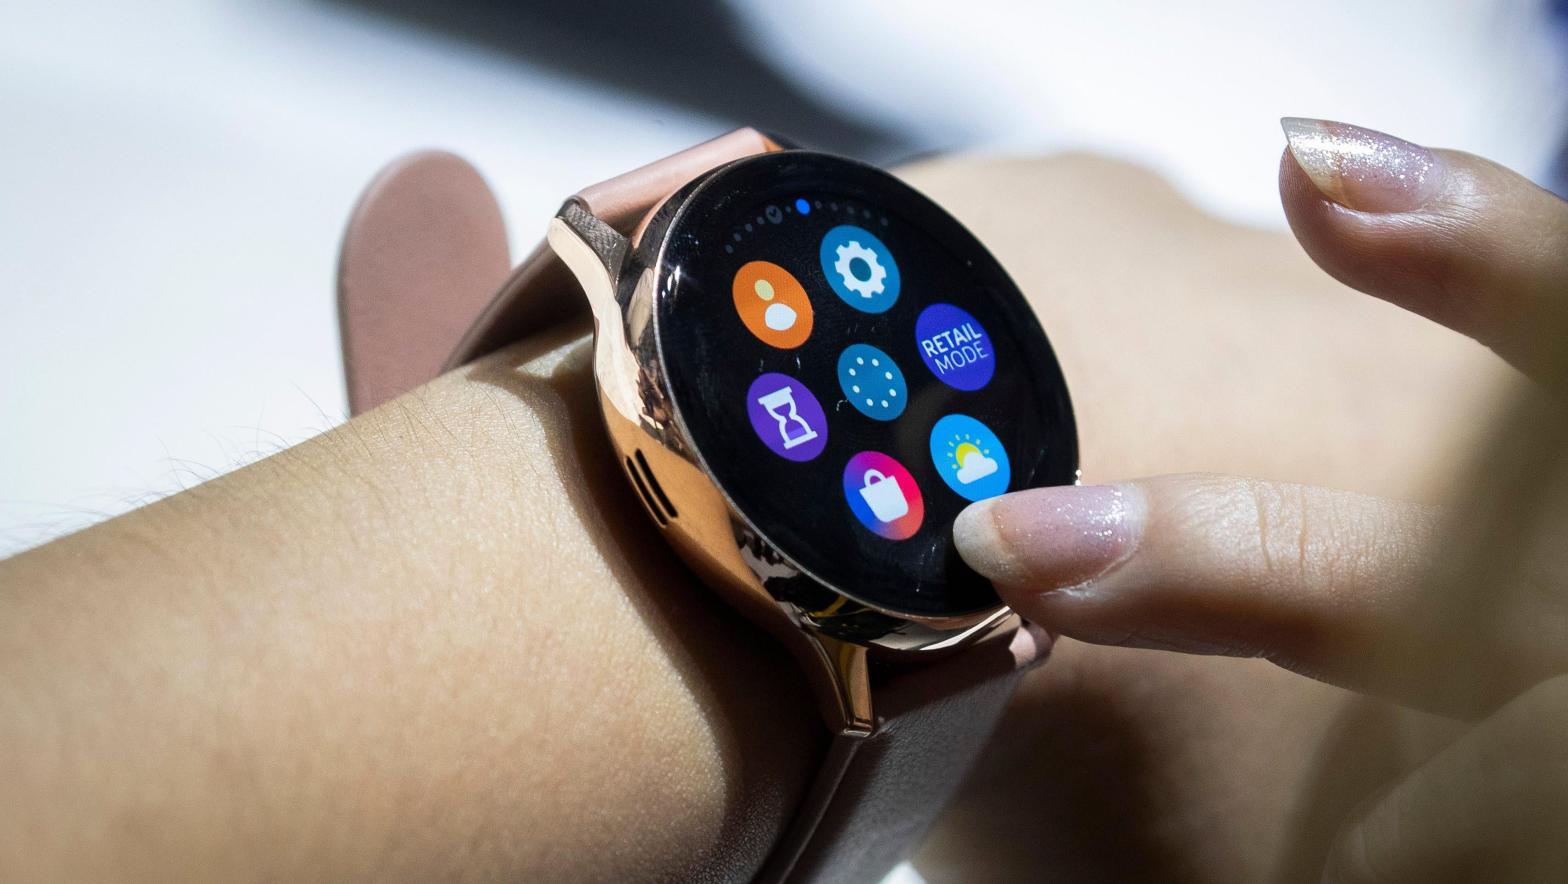 The Samsung Galaxy Watch Active 2 debuted in 2019, but some users have long complained about some watch devices overheating. (Photo: Drew Angerer/, Getty Images)